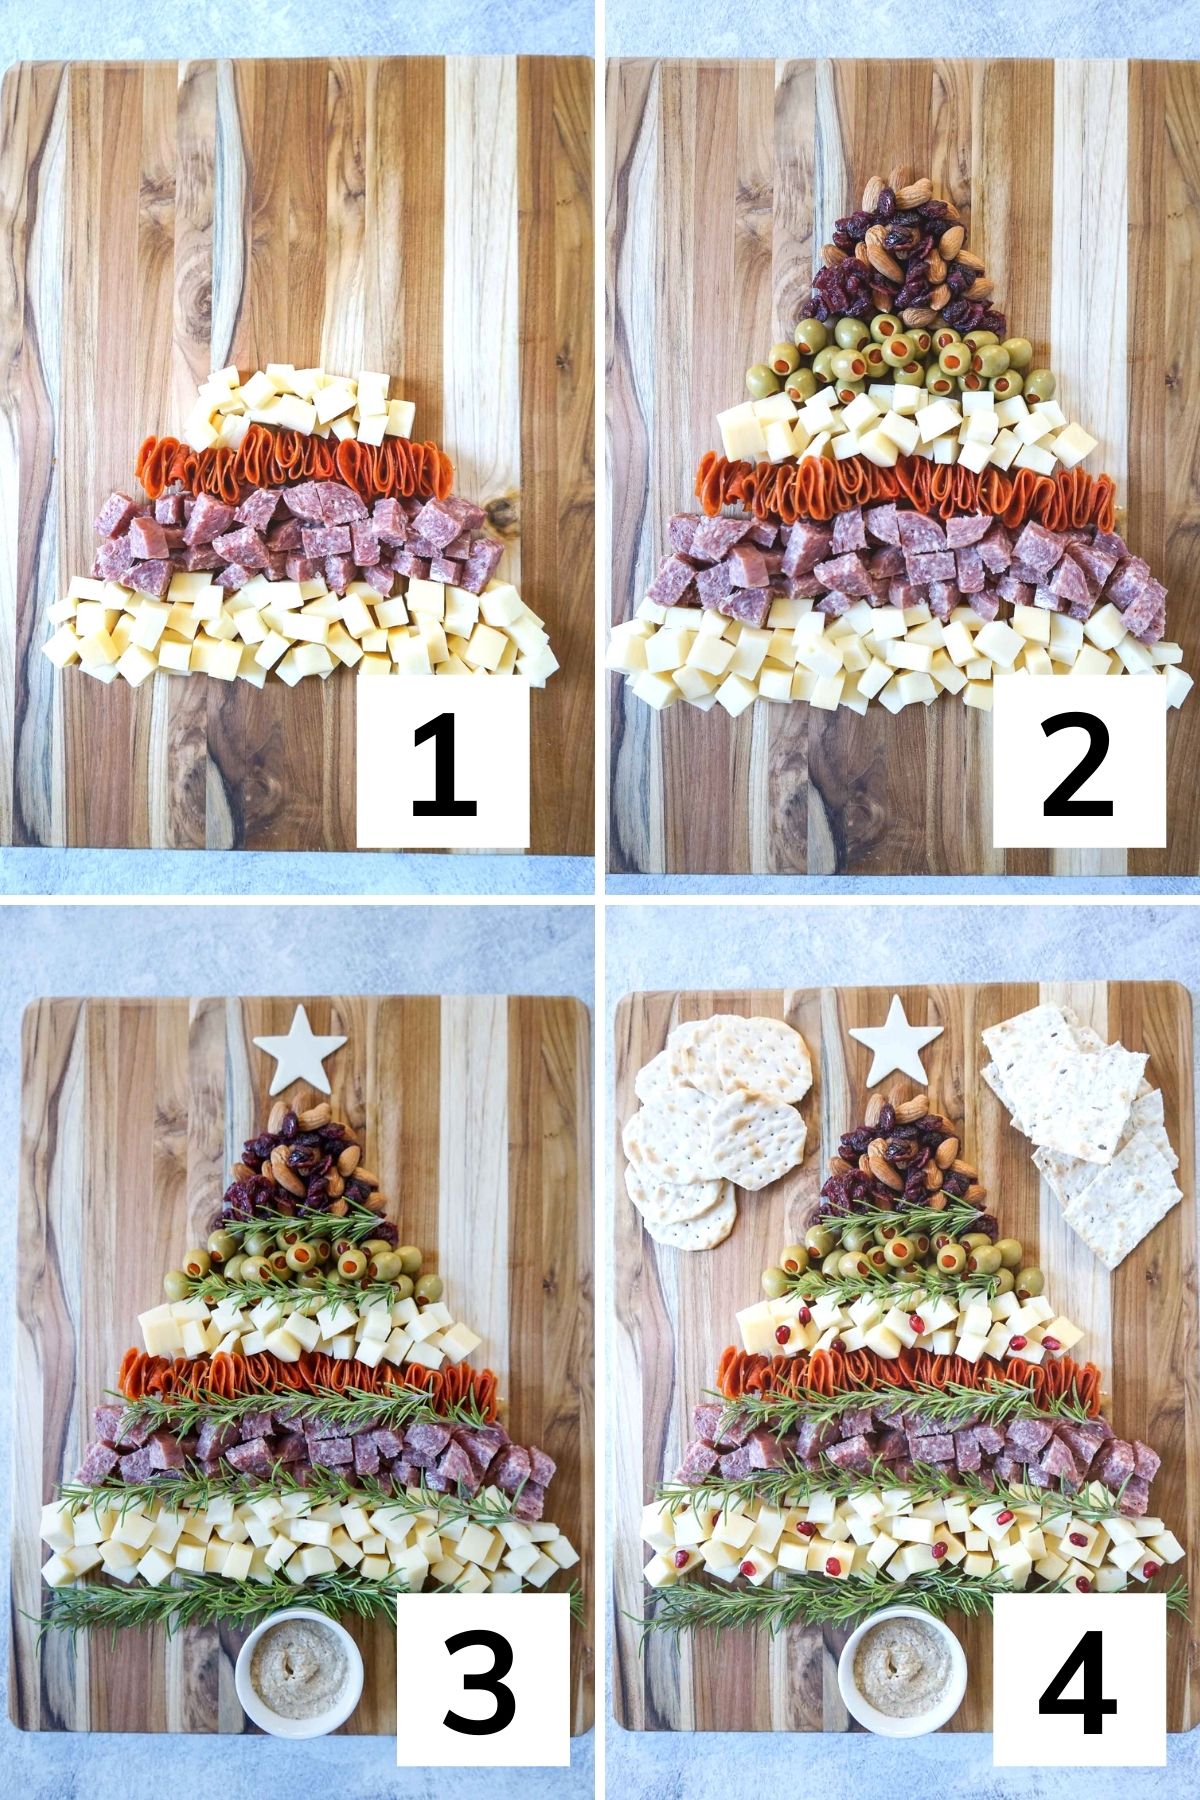 How to make a Christmas Tree Charcuterie Board step by step.